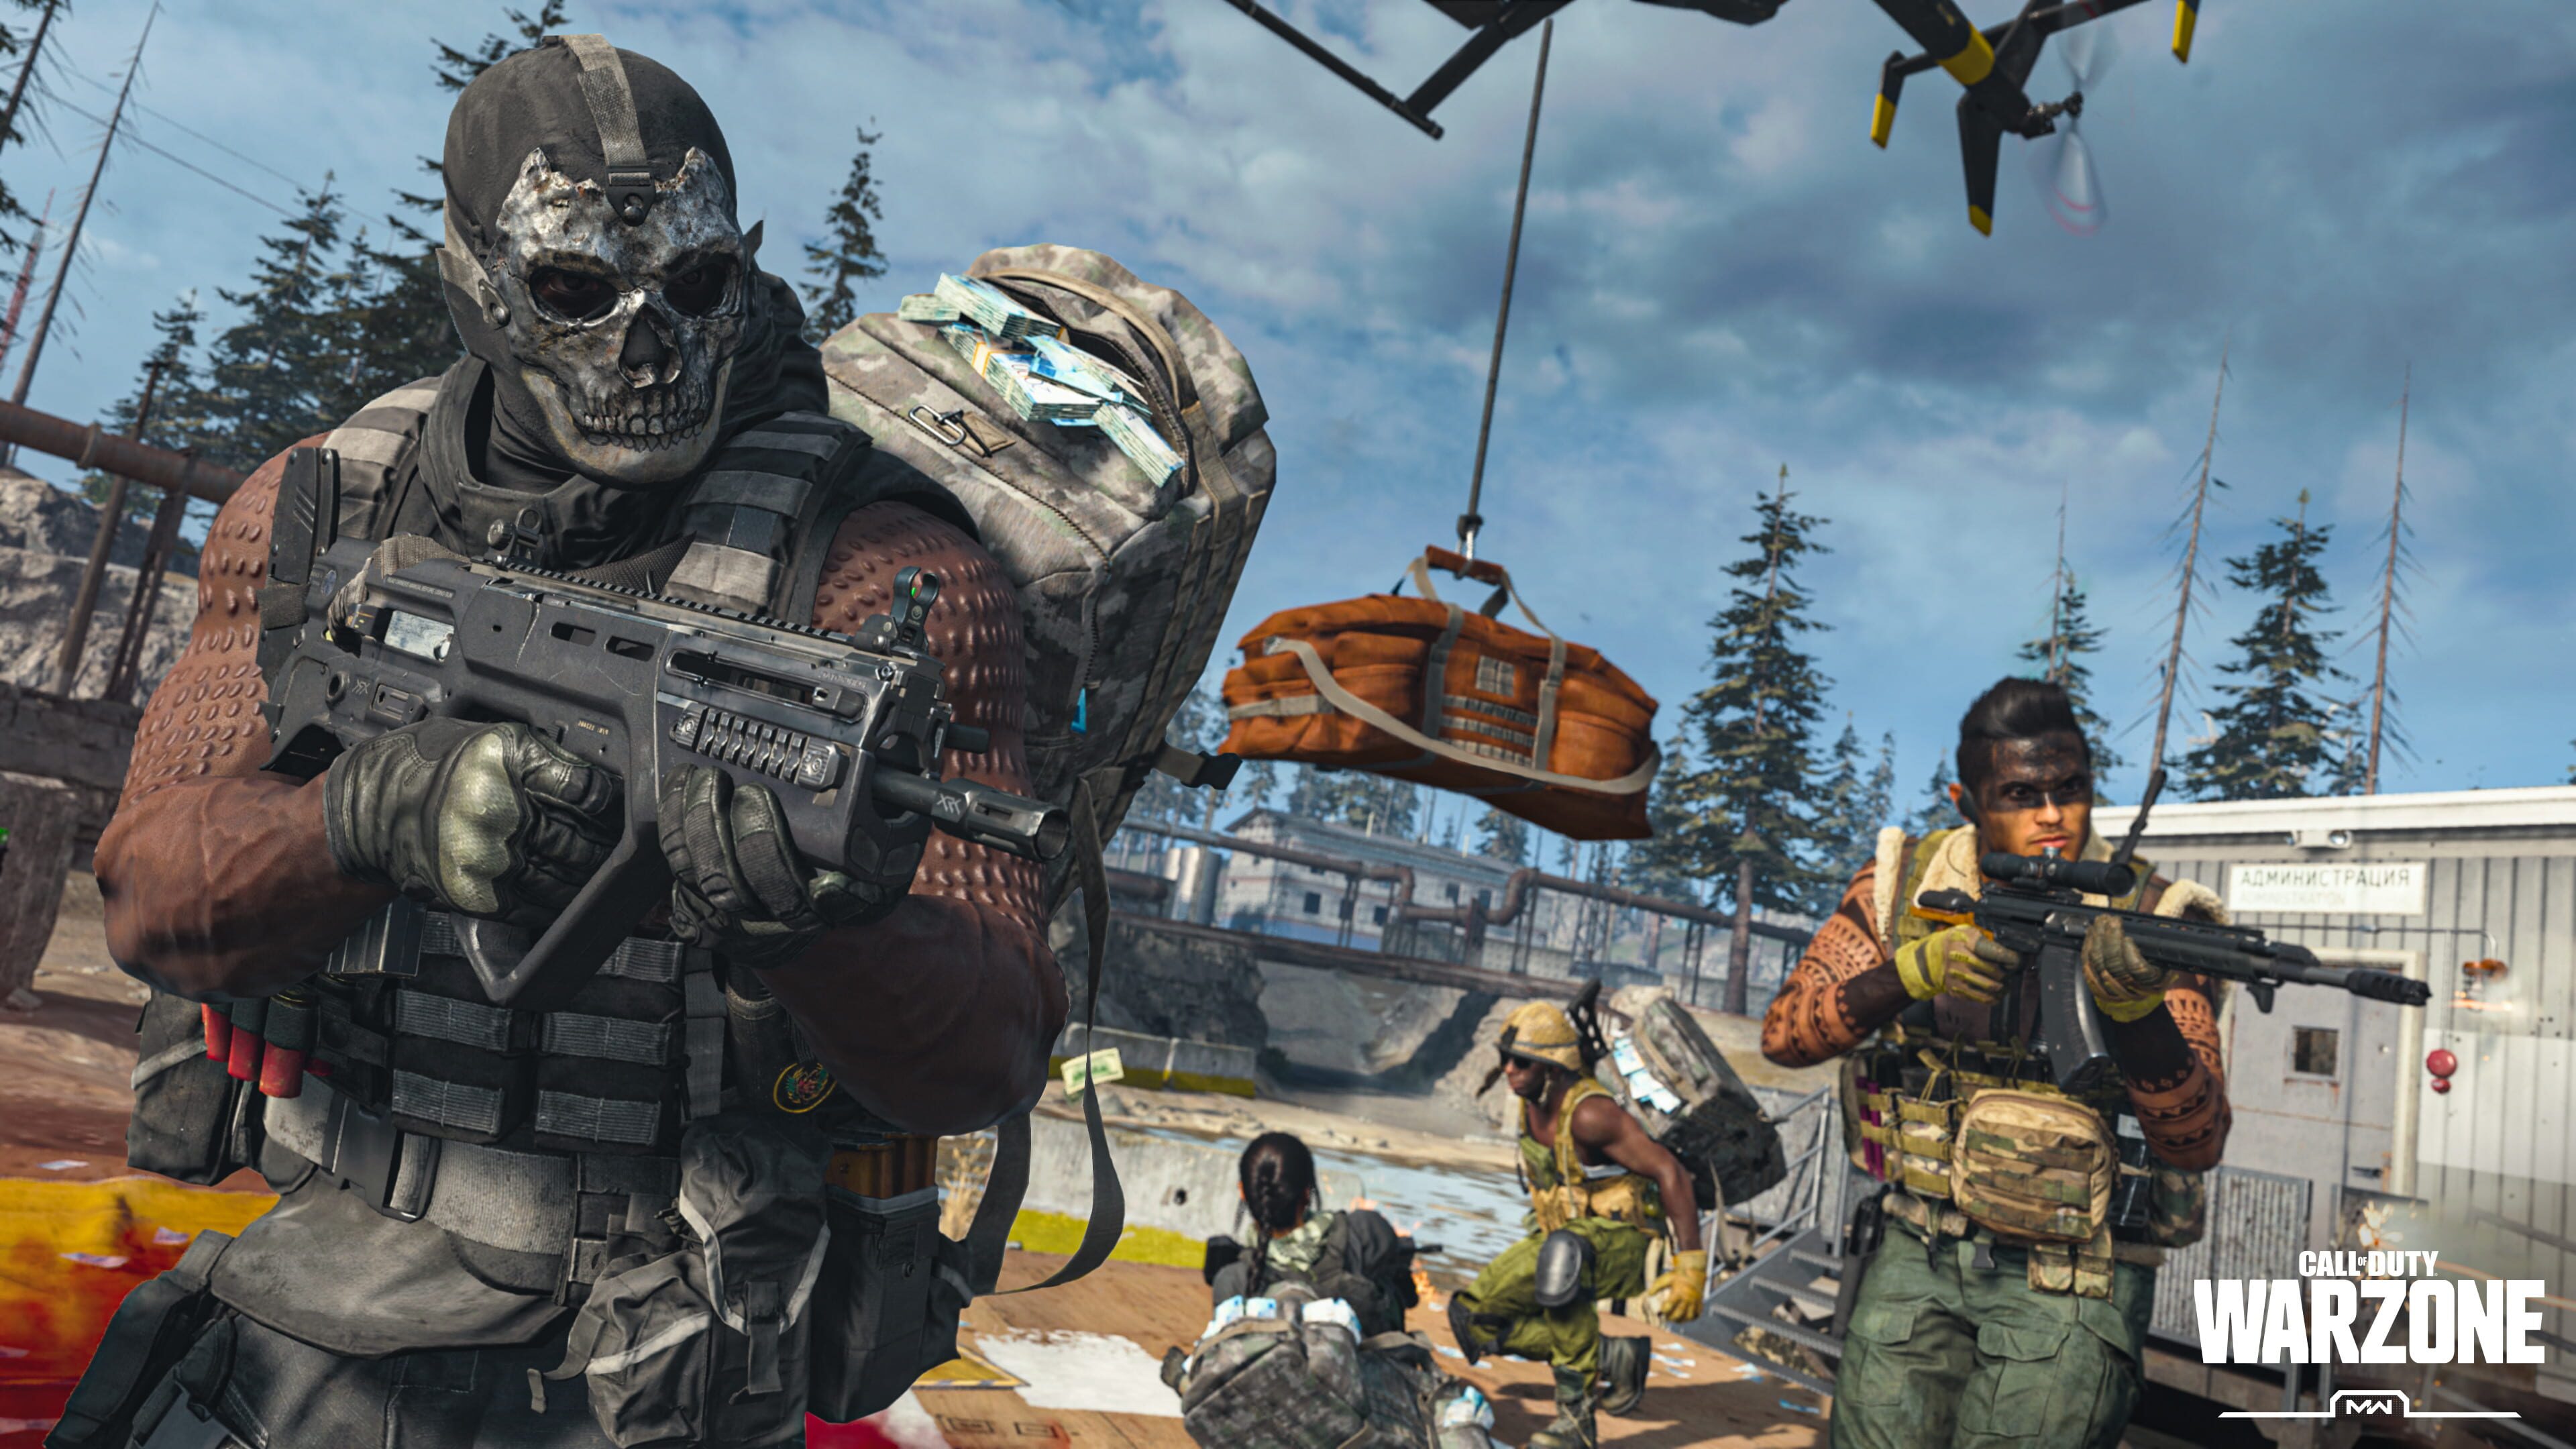 Is CoD: Mobile Shutting Down for Warzone Mobile? - GameRevolution